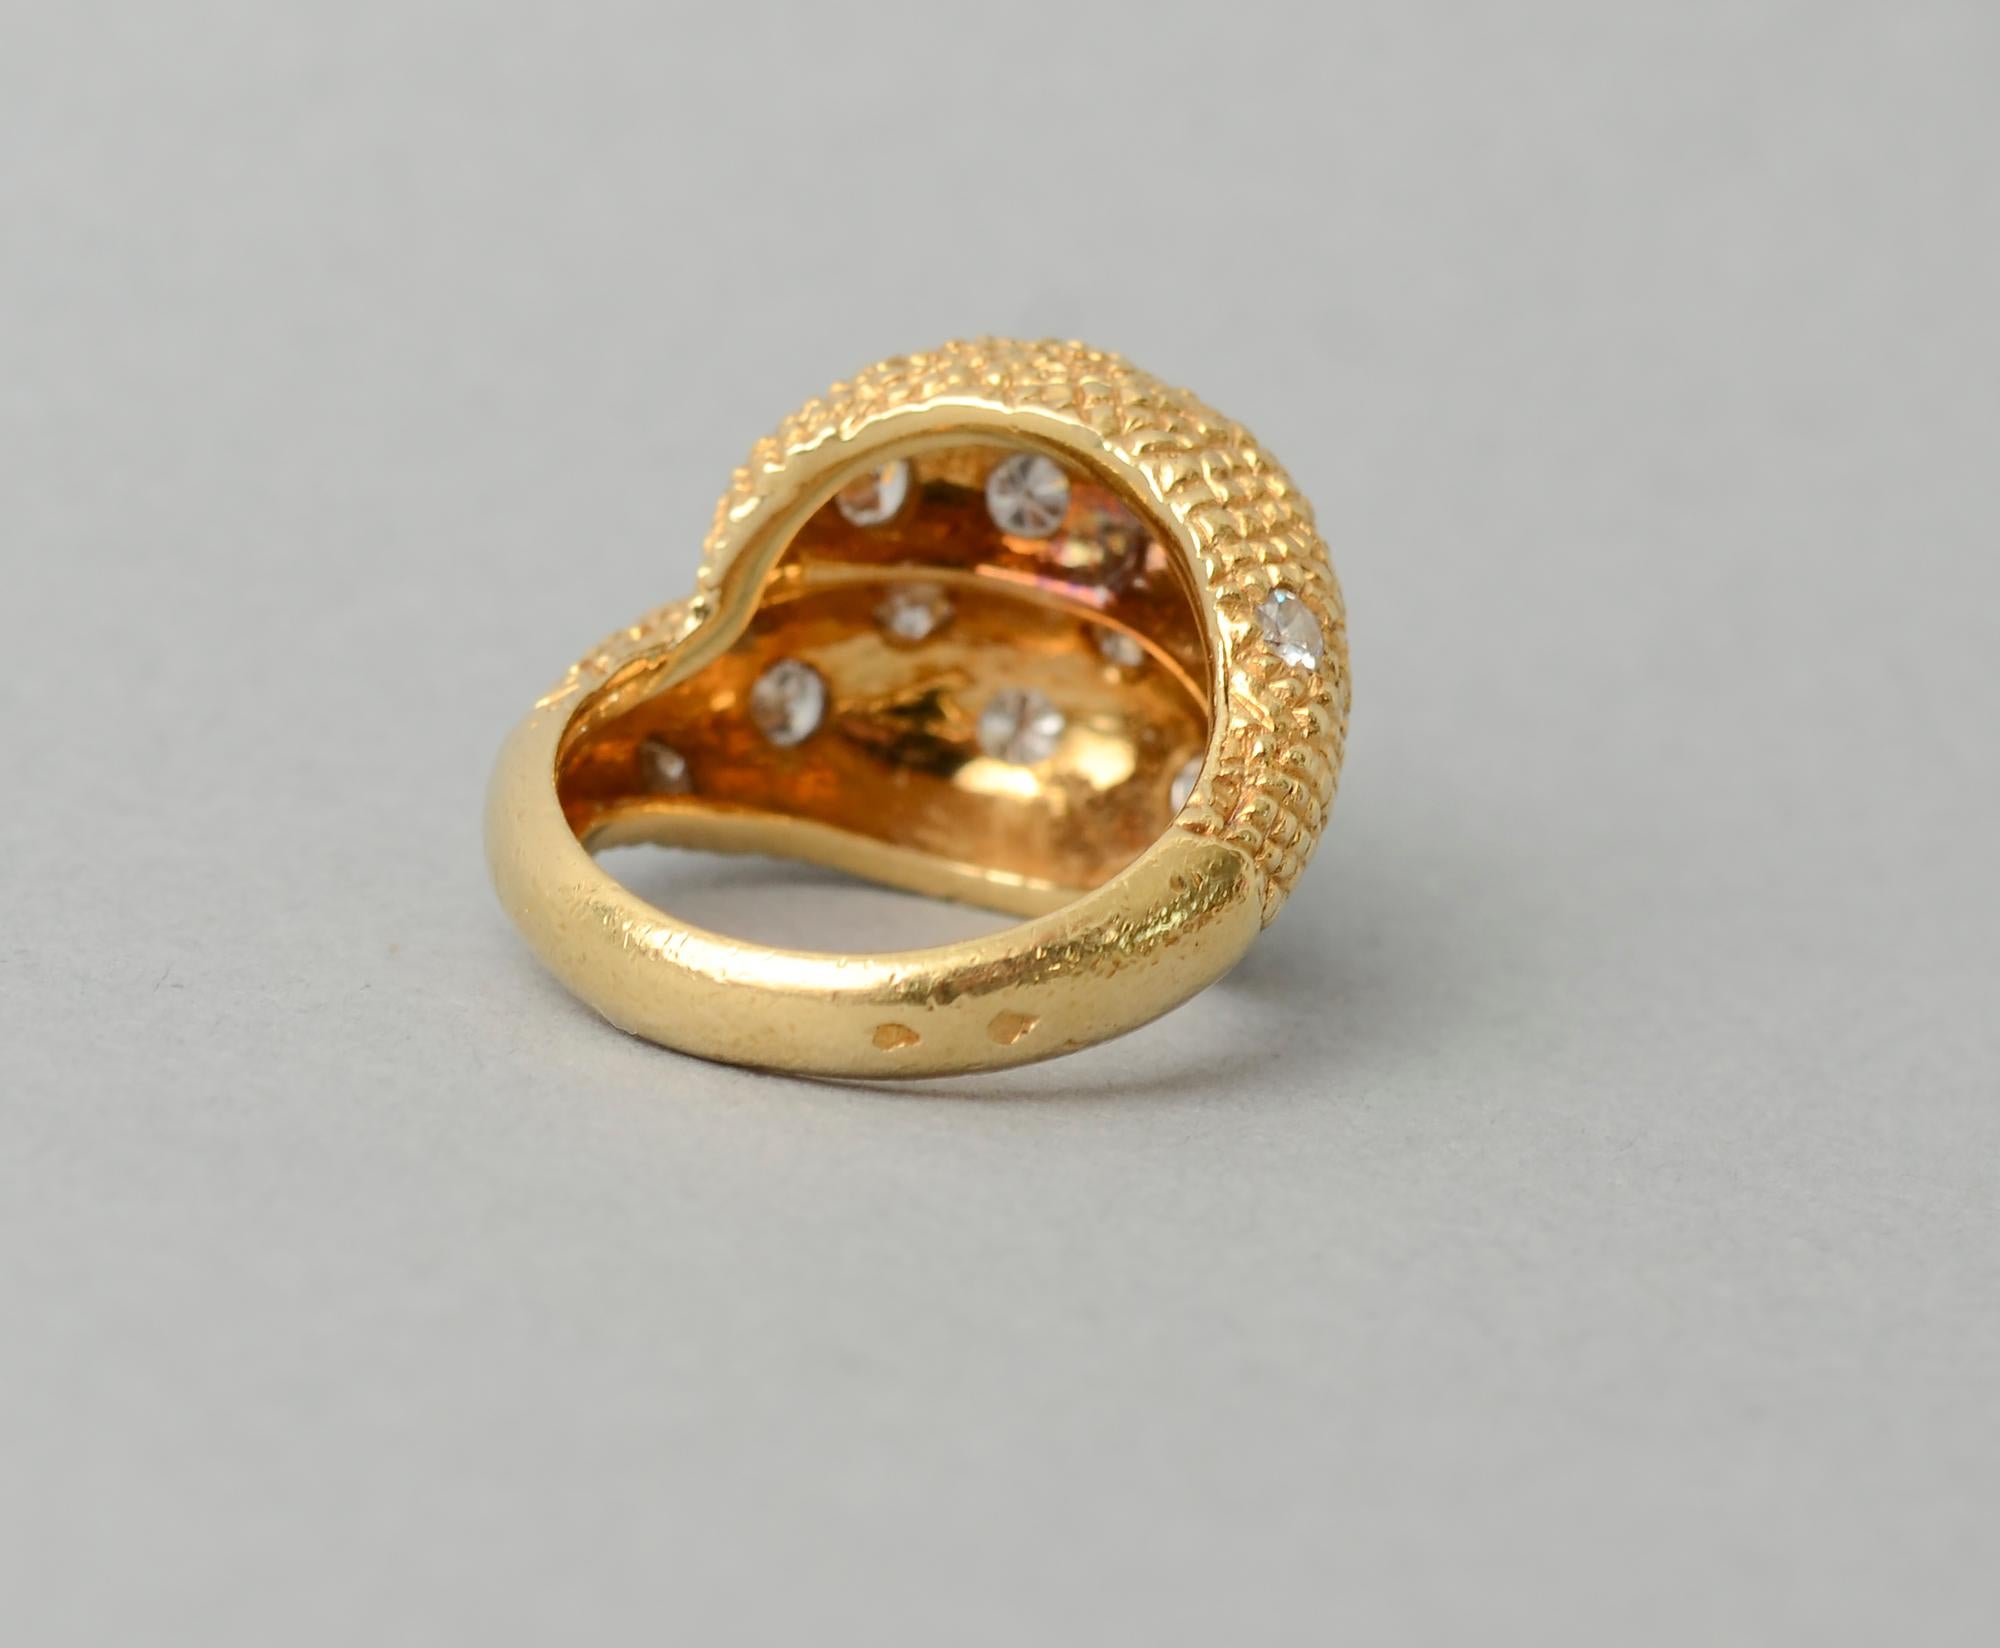 Brilliant Cut Van Cleef & Arpels Gold and Diamond Crossover Cocktail Ring